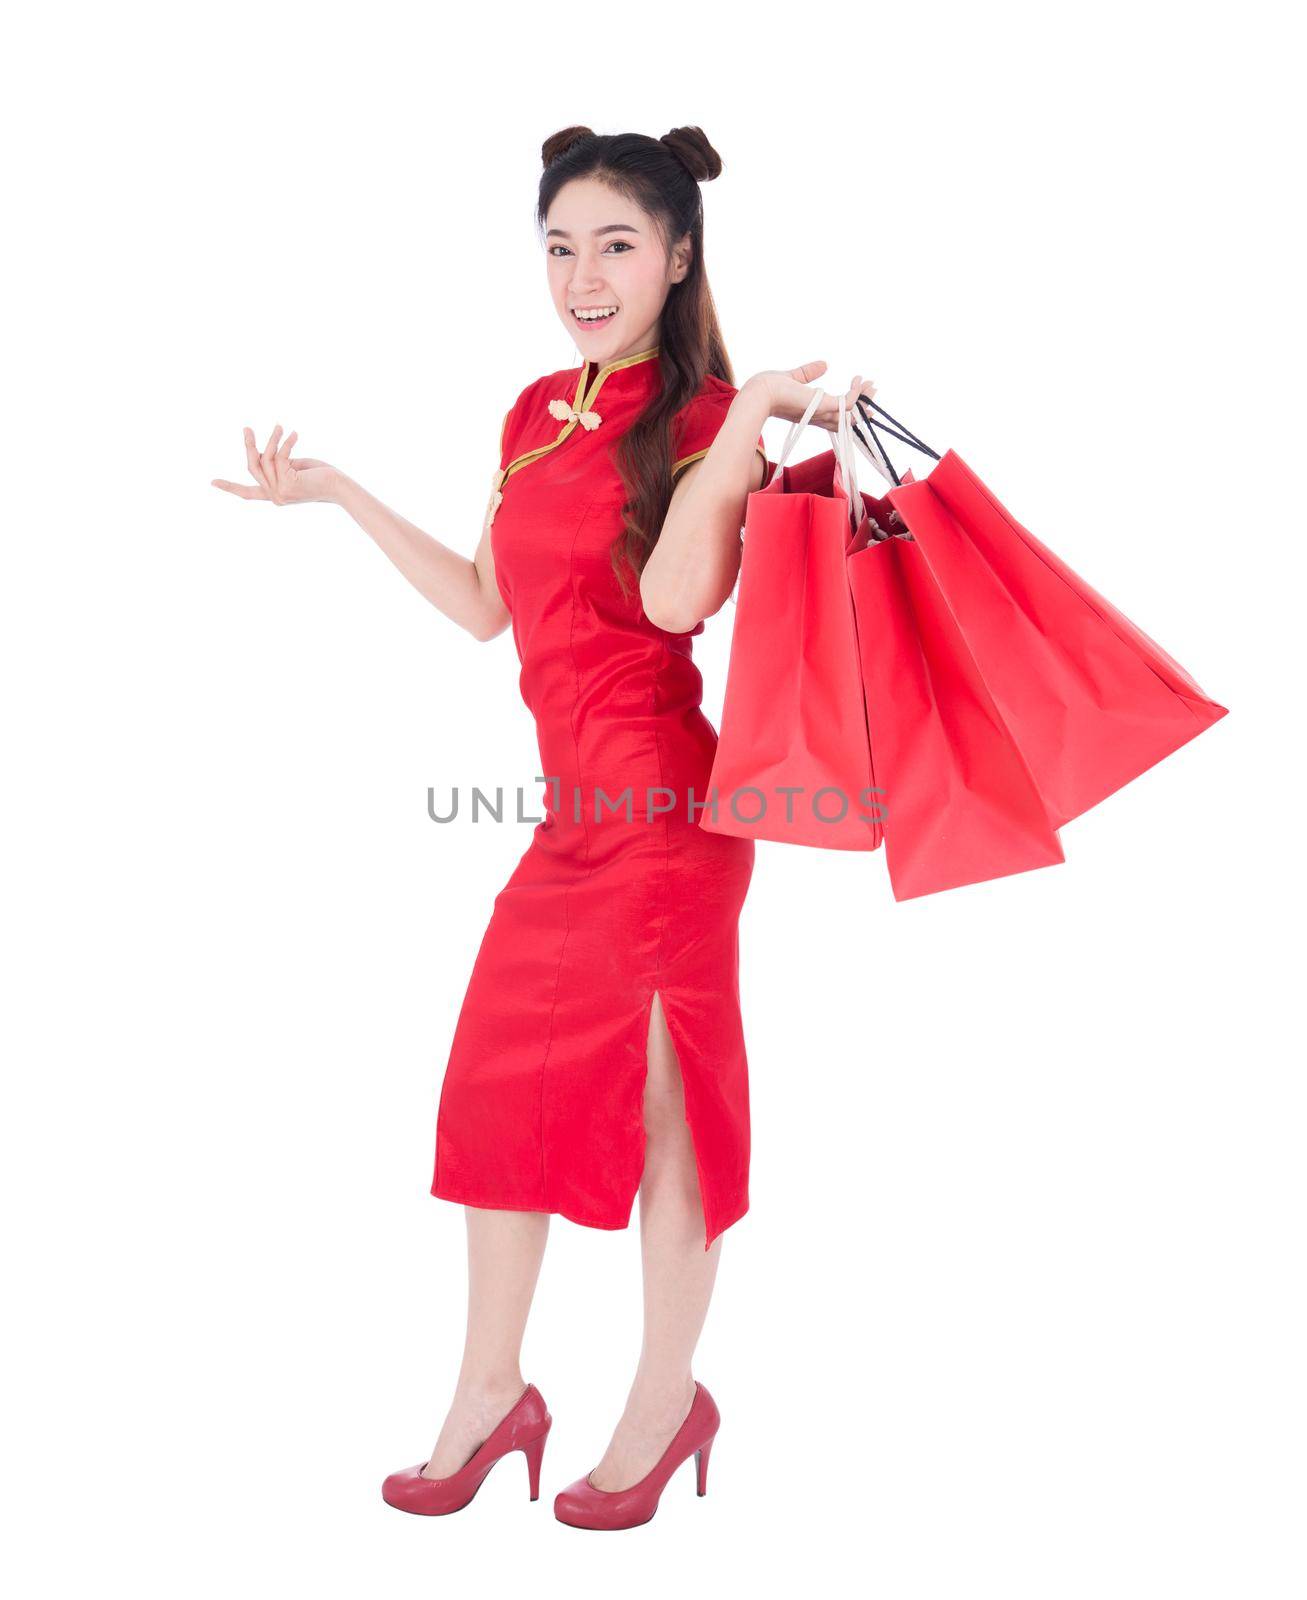 woman holding shopping bag on chinese new year celebration isolated on white background by geargodz